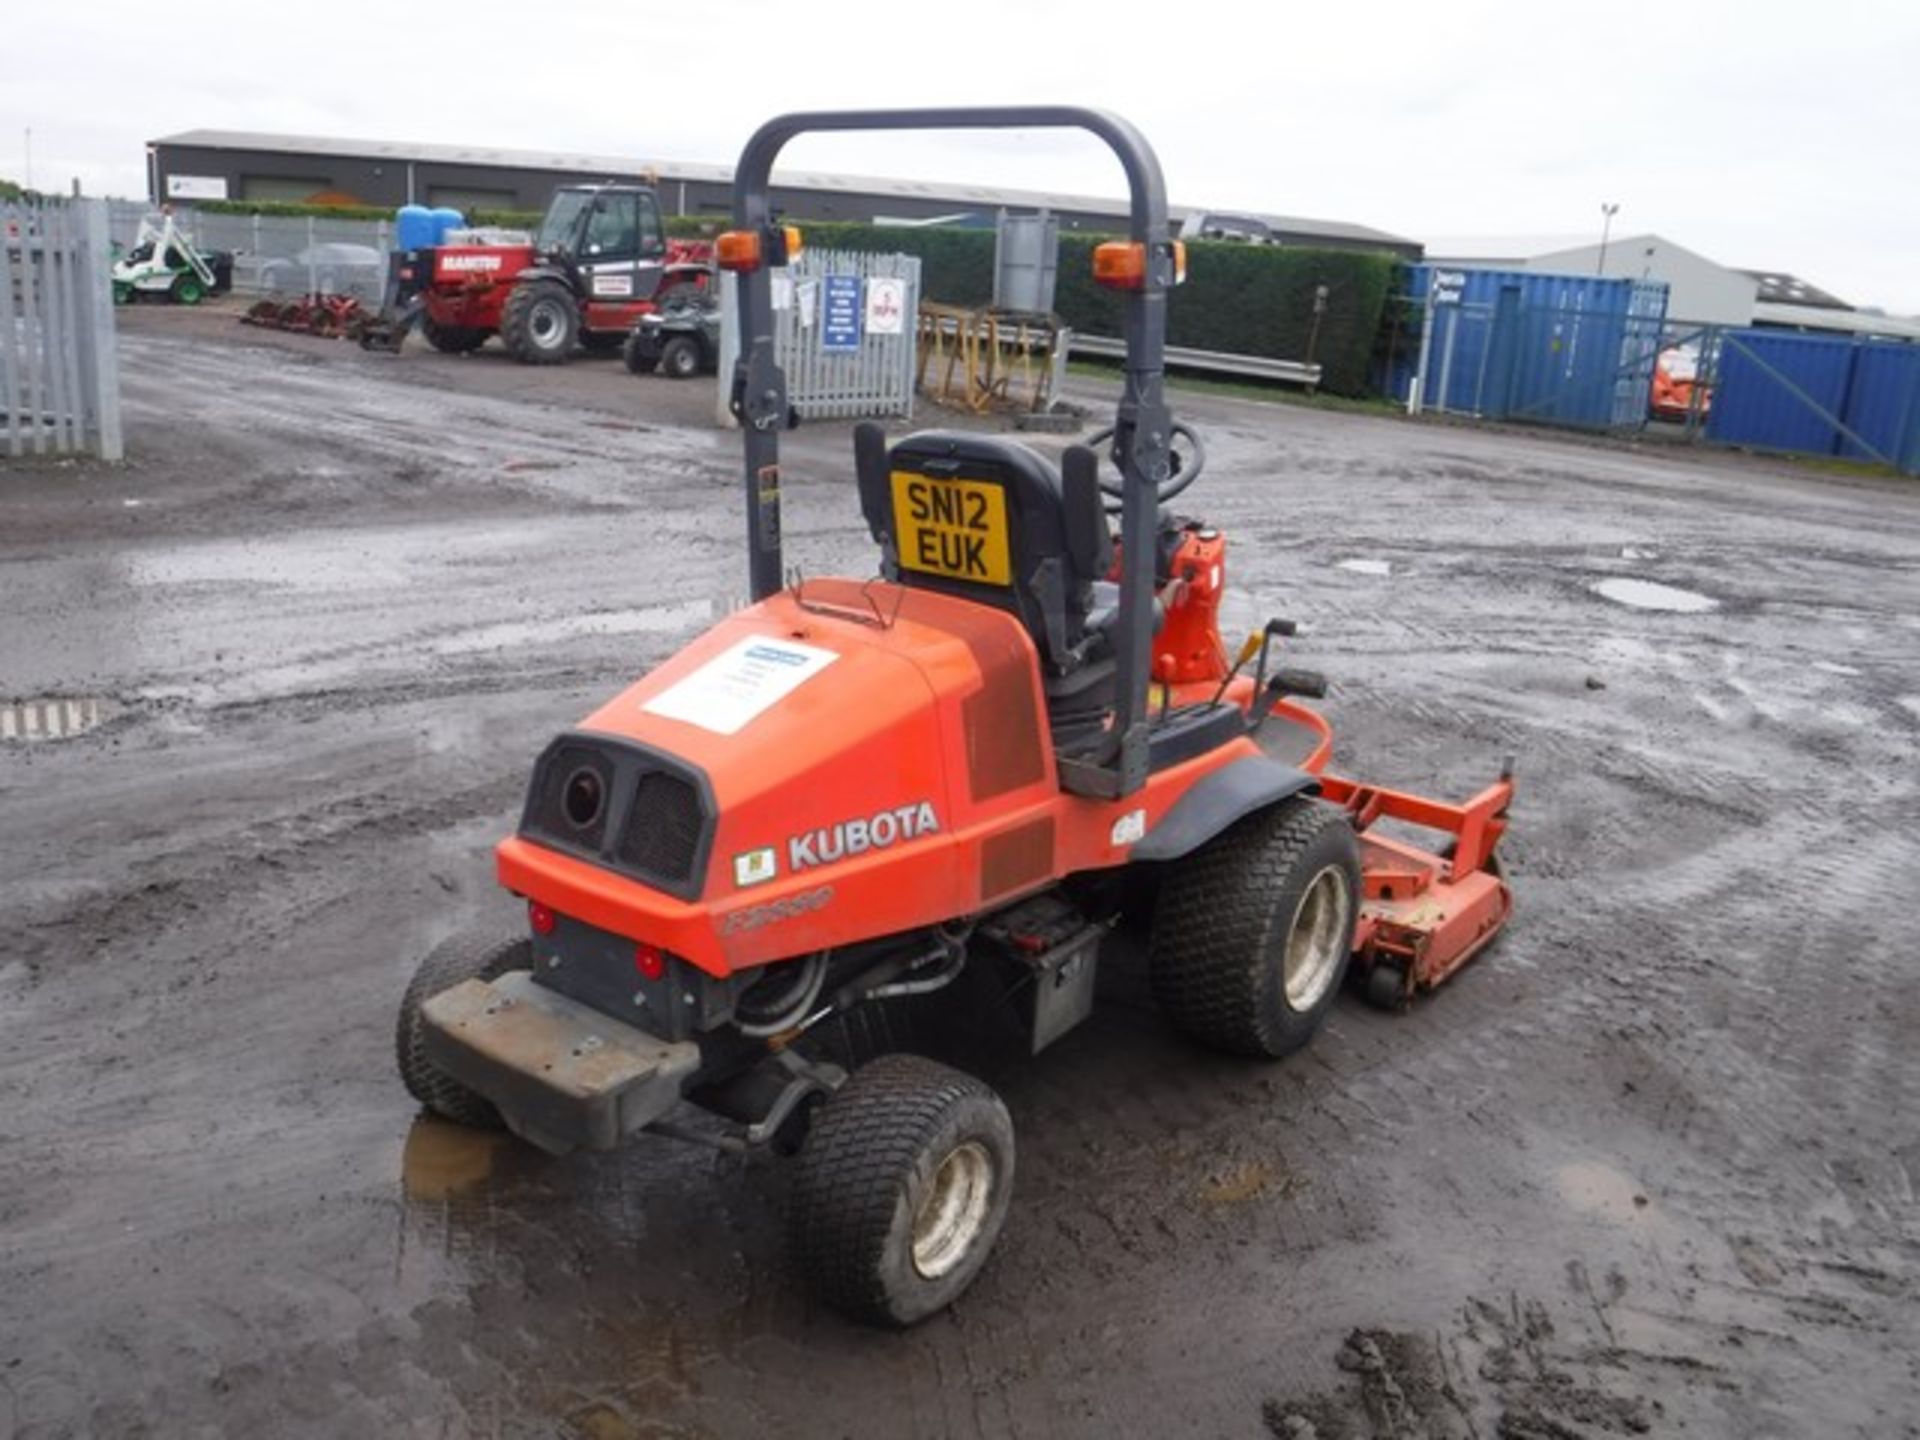 2012 KUBOTA F2880 MOWING MACHINE, REG - SN12EUK, S/N 31249, 824HRS (NOT VERIFIED) WITH FRONT MOUNTED - Image 8 of 14